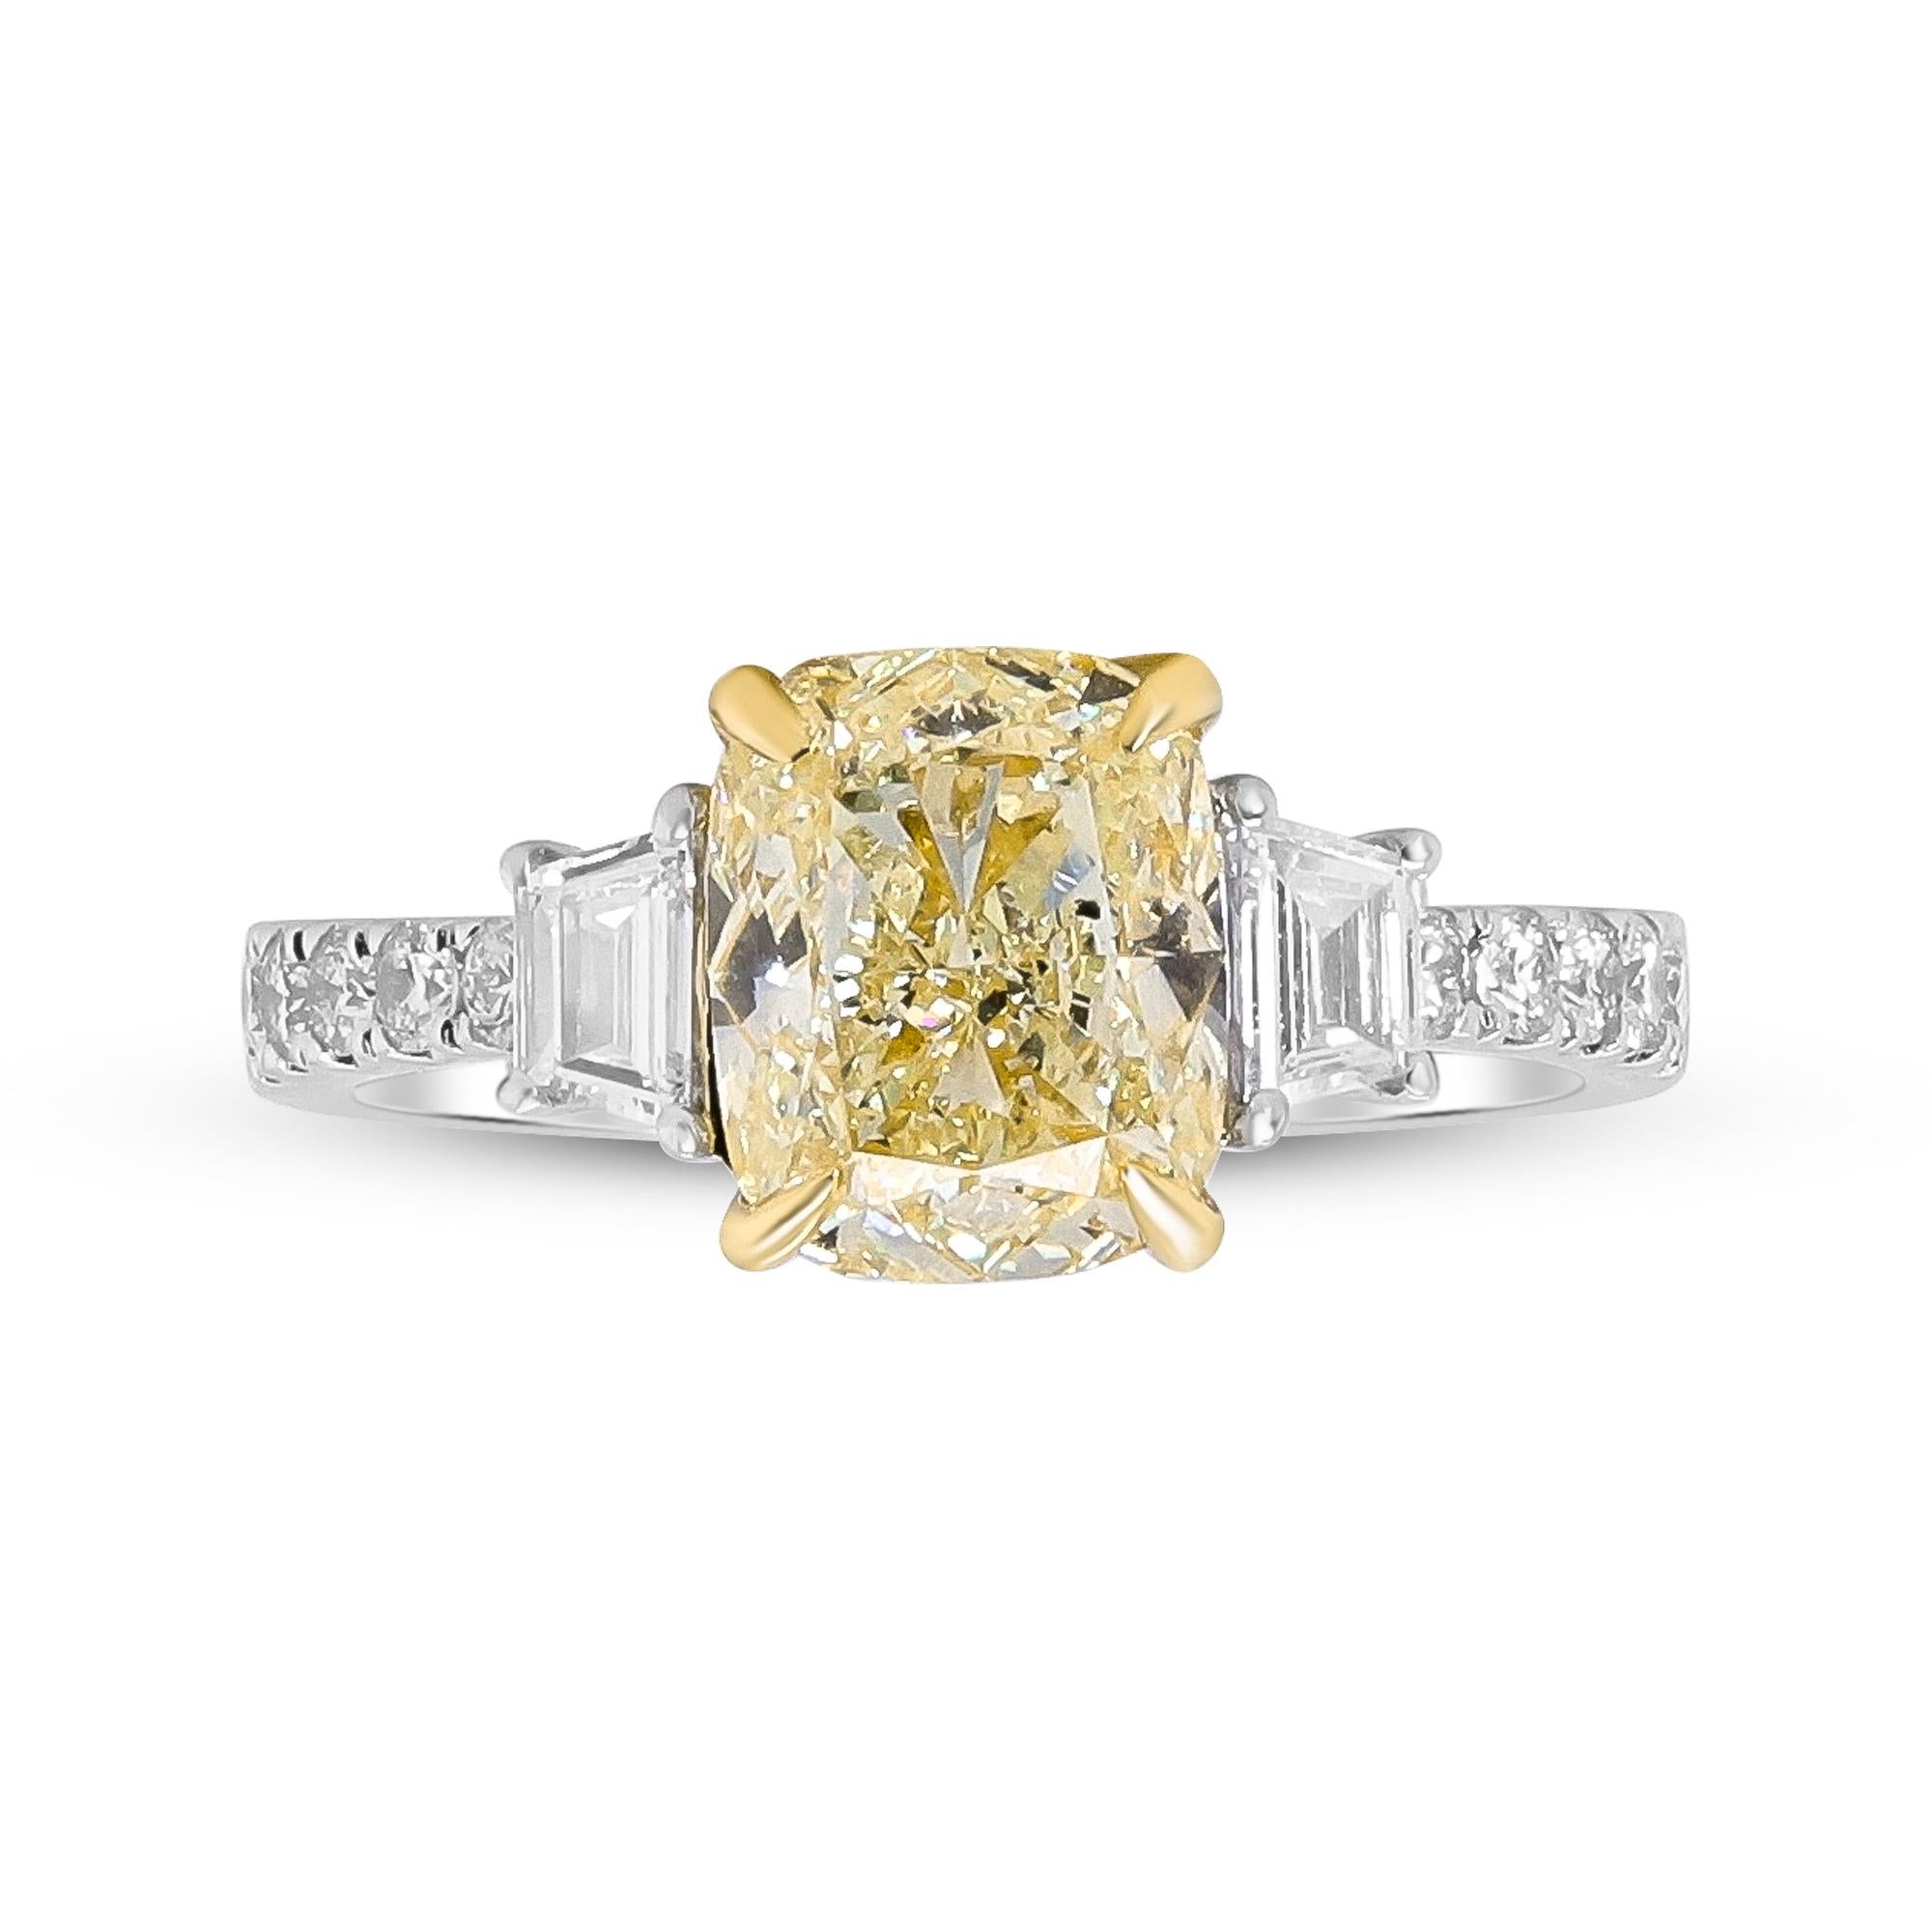 Stunning, timeless, and classy eternity Unique Ring. Decorate yourself in luxury with this Gin & Grace Ring. The 18K Two Tone Gold jewelry boasts with Cushion-cut 1 pcs 5.28 carat, Baguette-cut 2 pcs 0.46 carat Natural Round-cut white Diamond (10